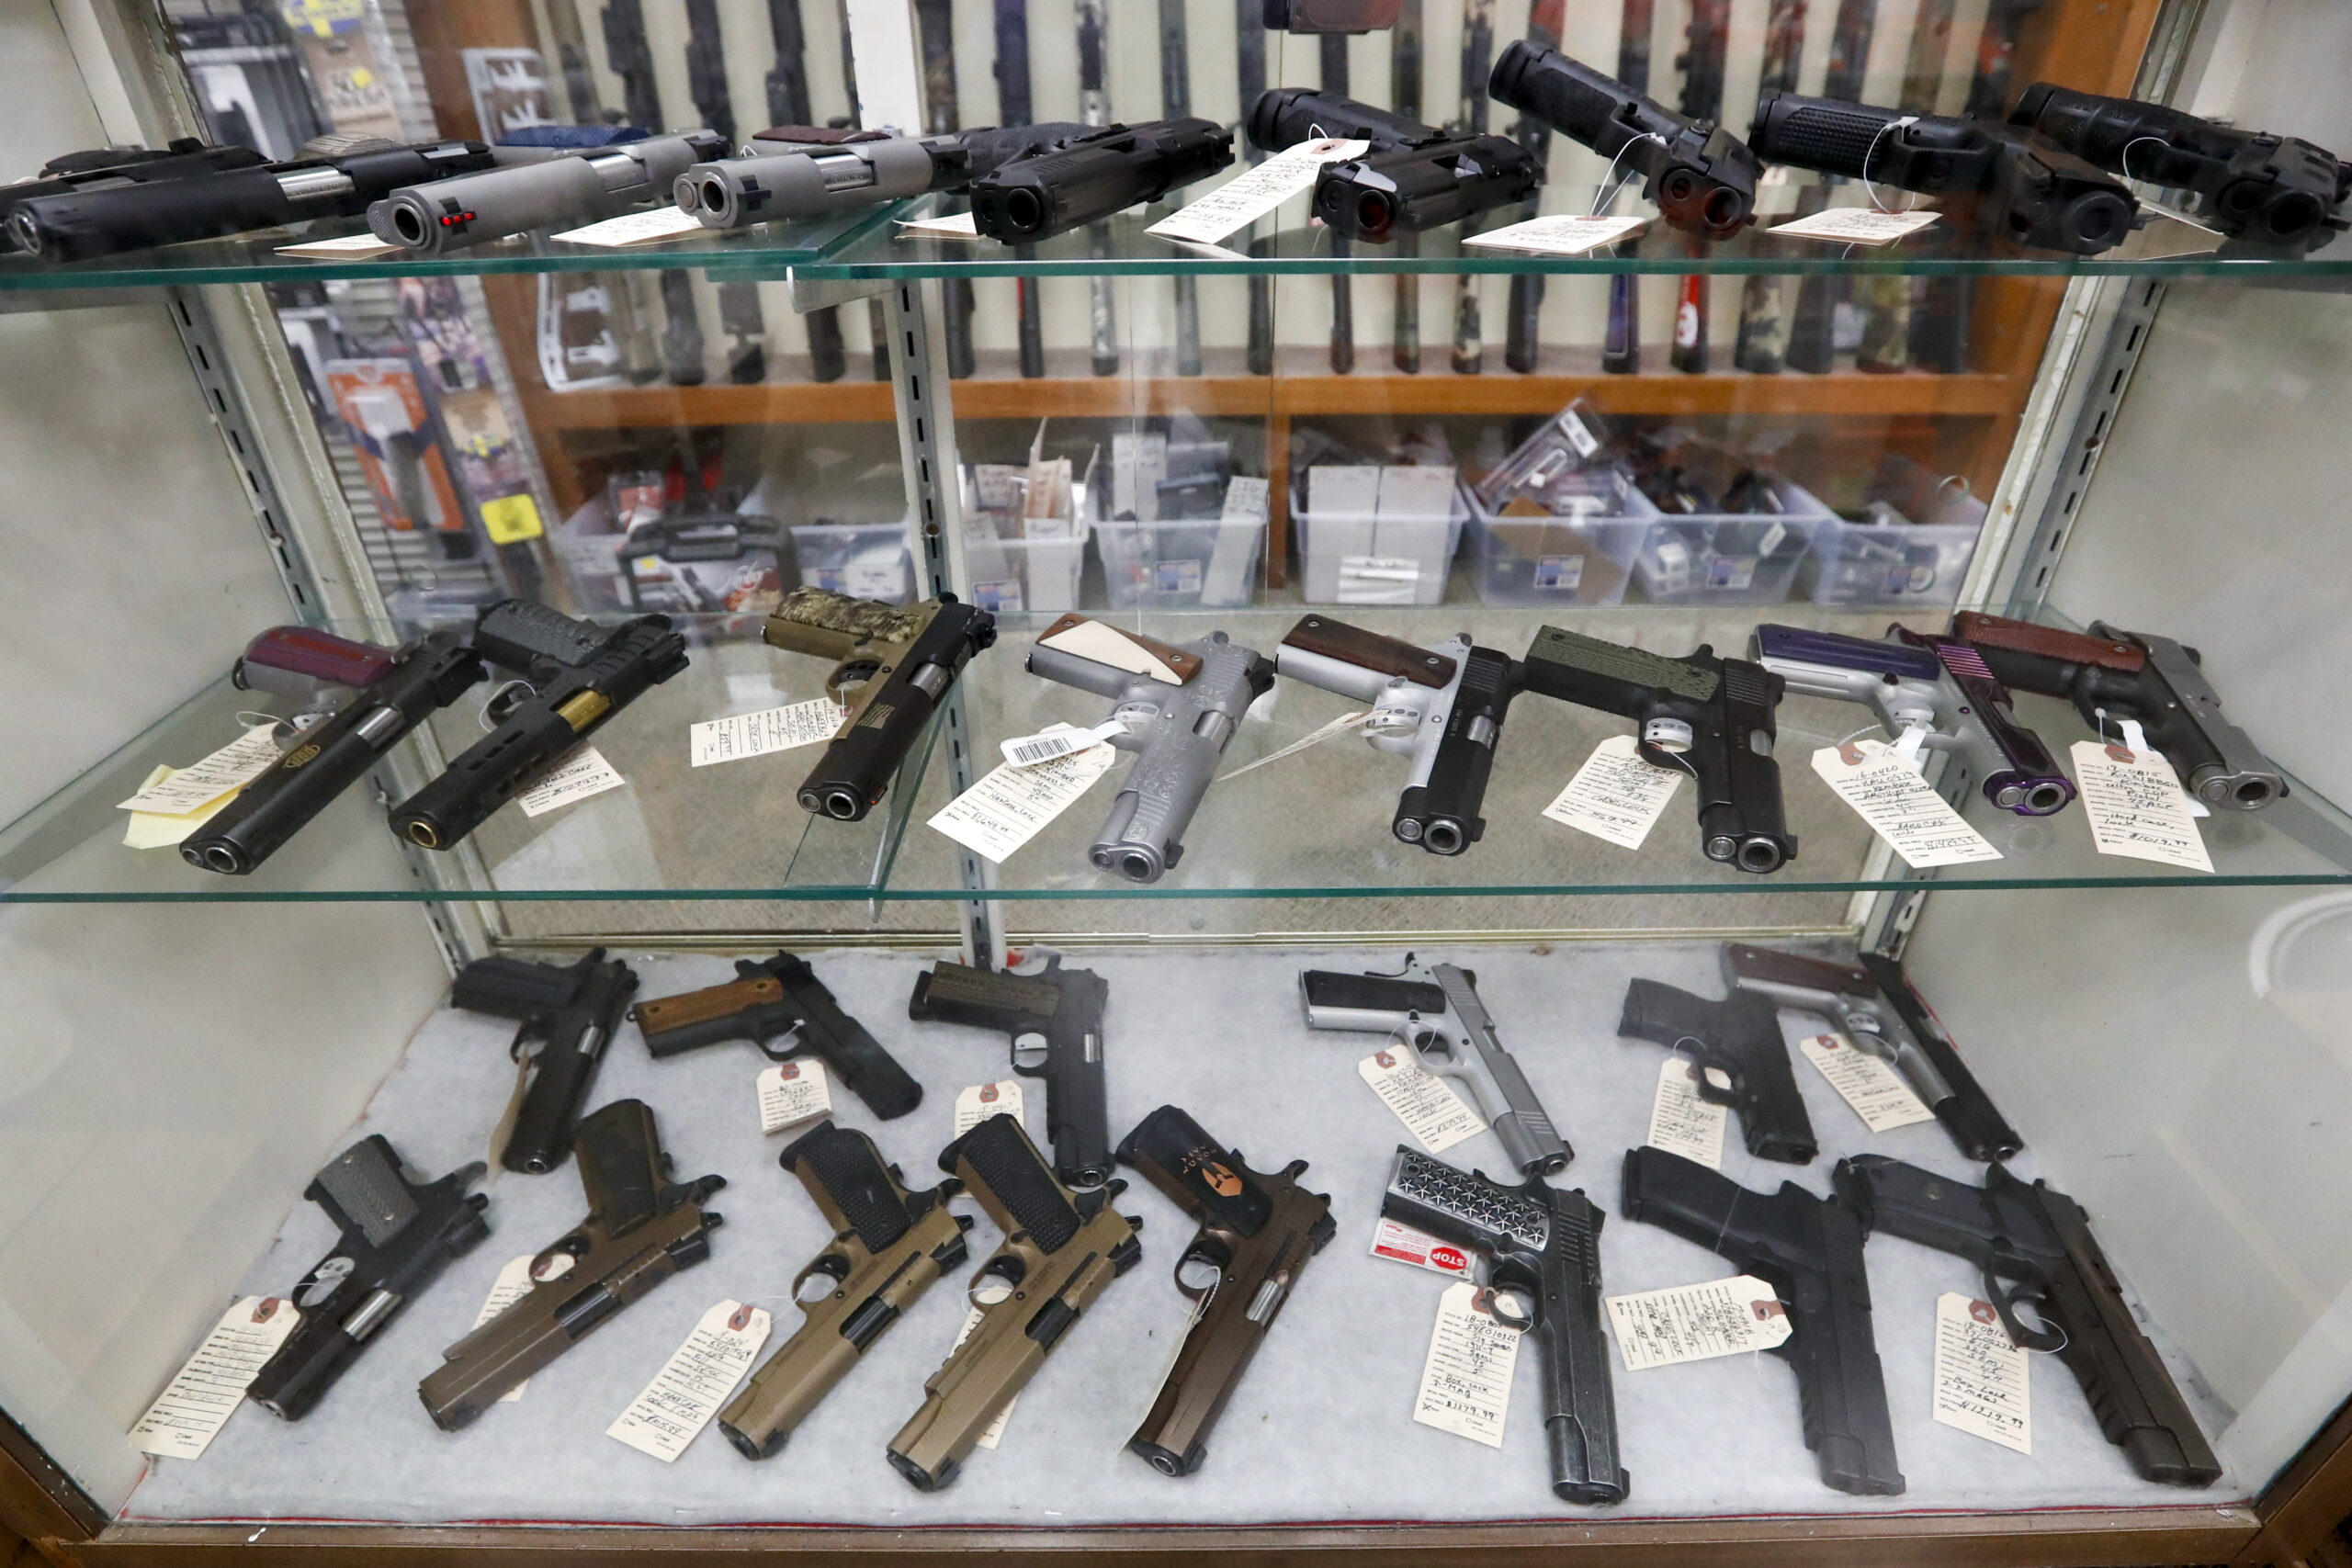 FILE - In this March 25, 2020, file photo semi-automatic handguns are displayed at shop in New Castle, Pa. The number of people stopped from buying guns though the U.S. background check system hit an all-time high of more than 300,000 last year amid a surge of firearm sales, according to new records obtained by the group Everytown for Gun Safety. The FBI numbers provided to The Associated Press show the background checks blocked nearly twice as many gun sales in 2020 as in the year before. (AP Photo/Keith Srakocic, File)